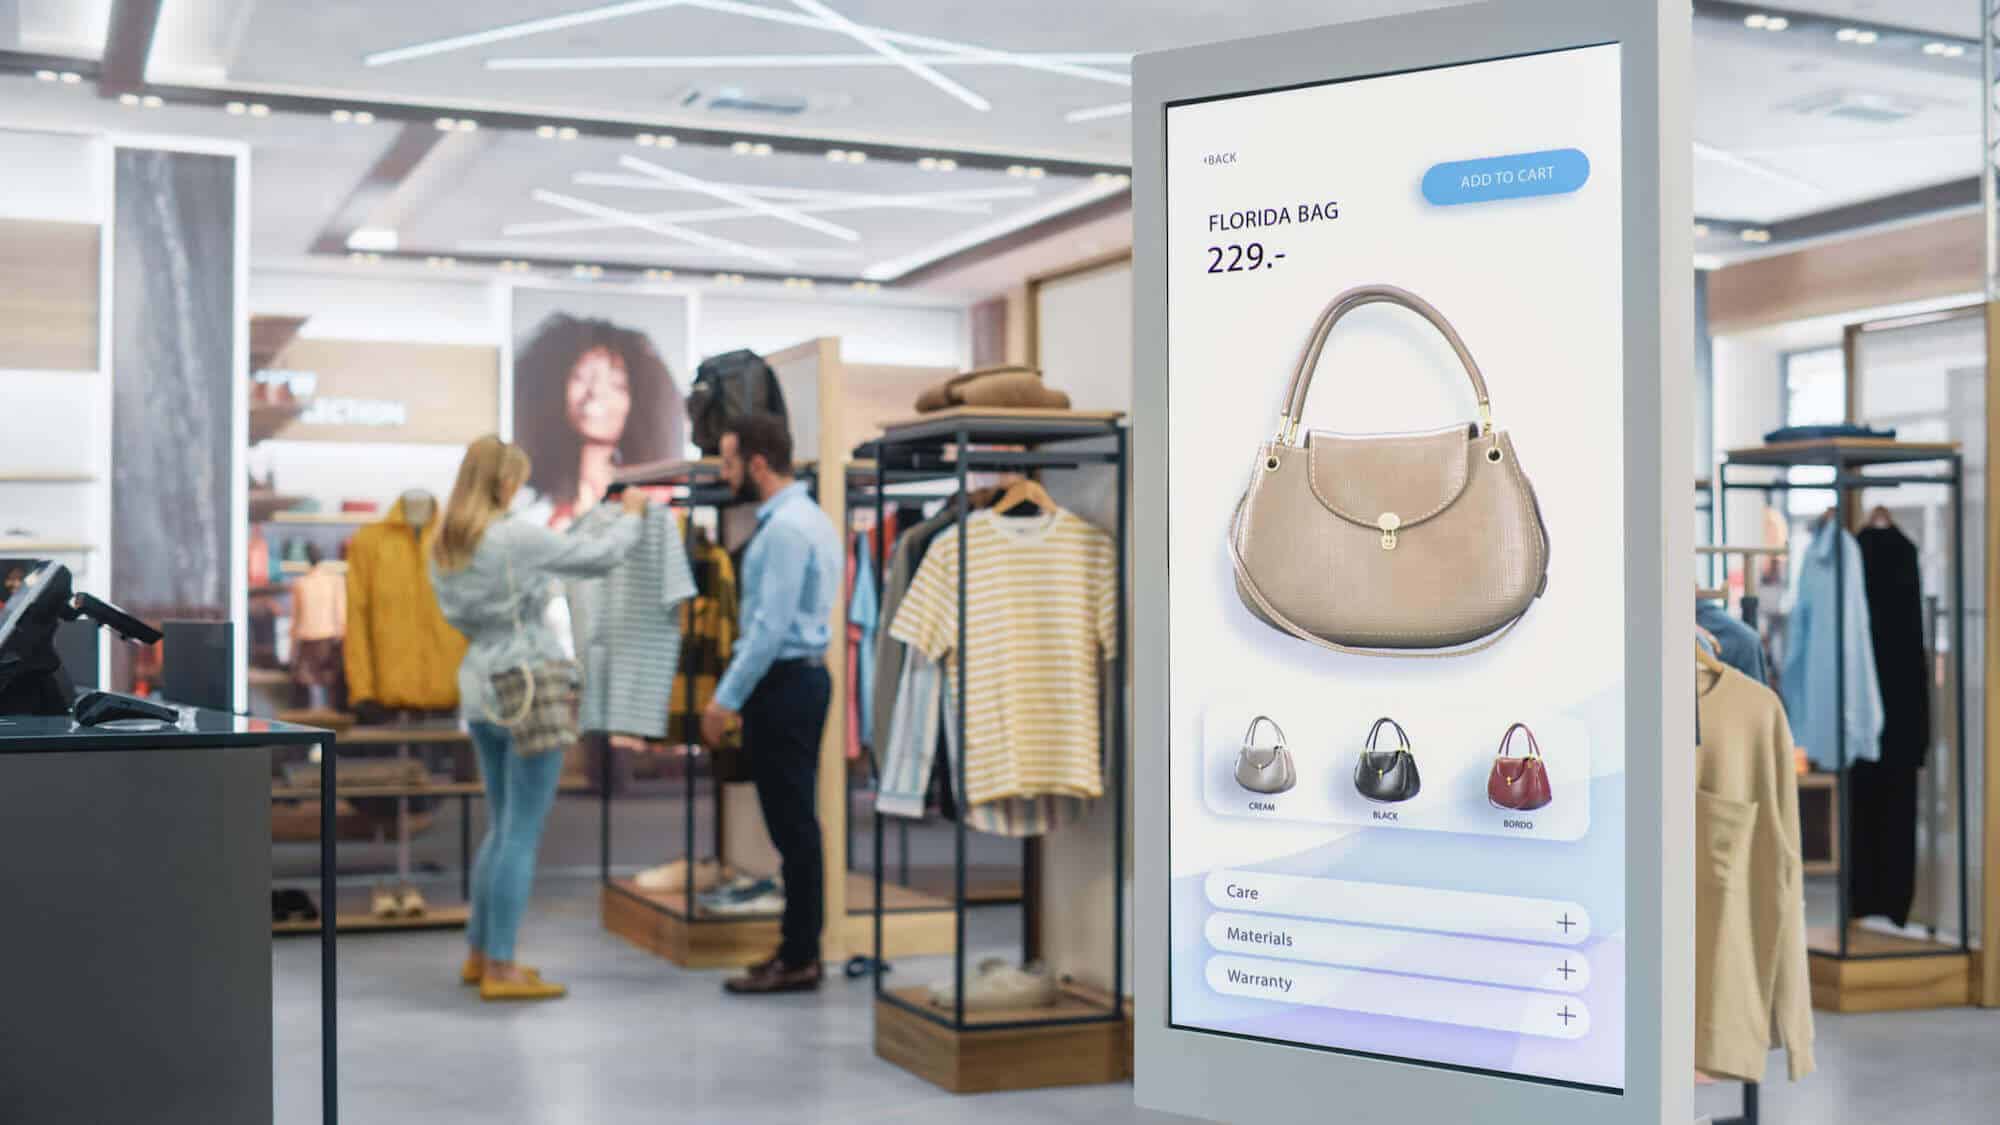 A-digital-sign-illuminates-an-advertisement-for-a-purse-while-shoppers-browse-racks-of-clothing-nearby.